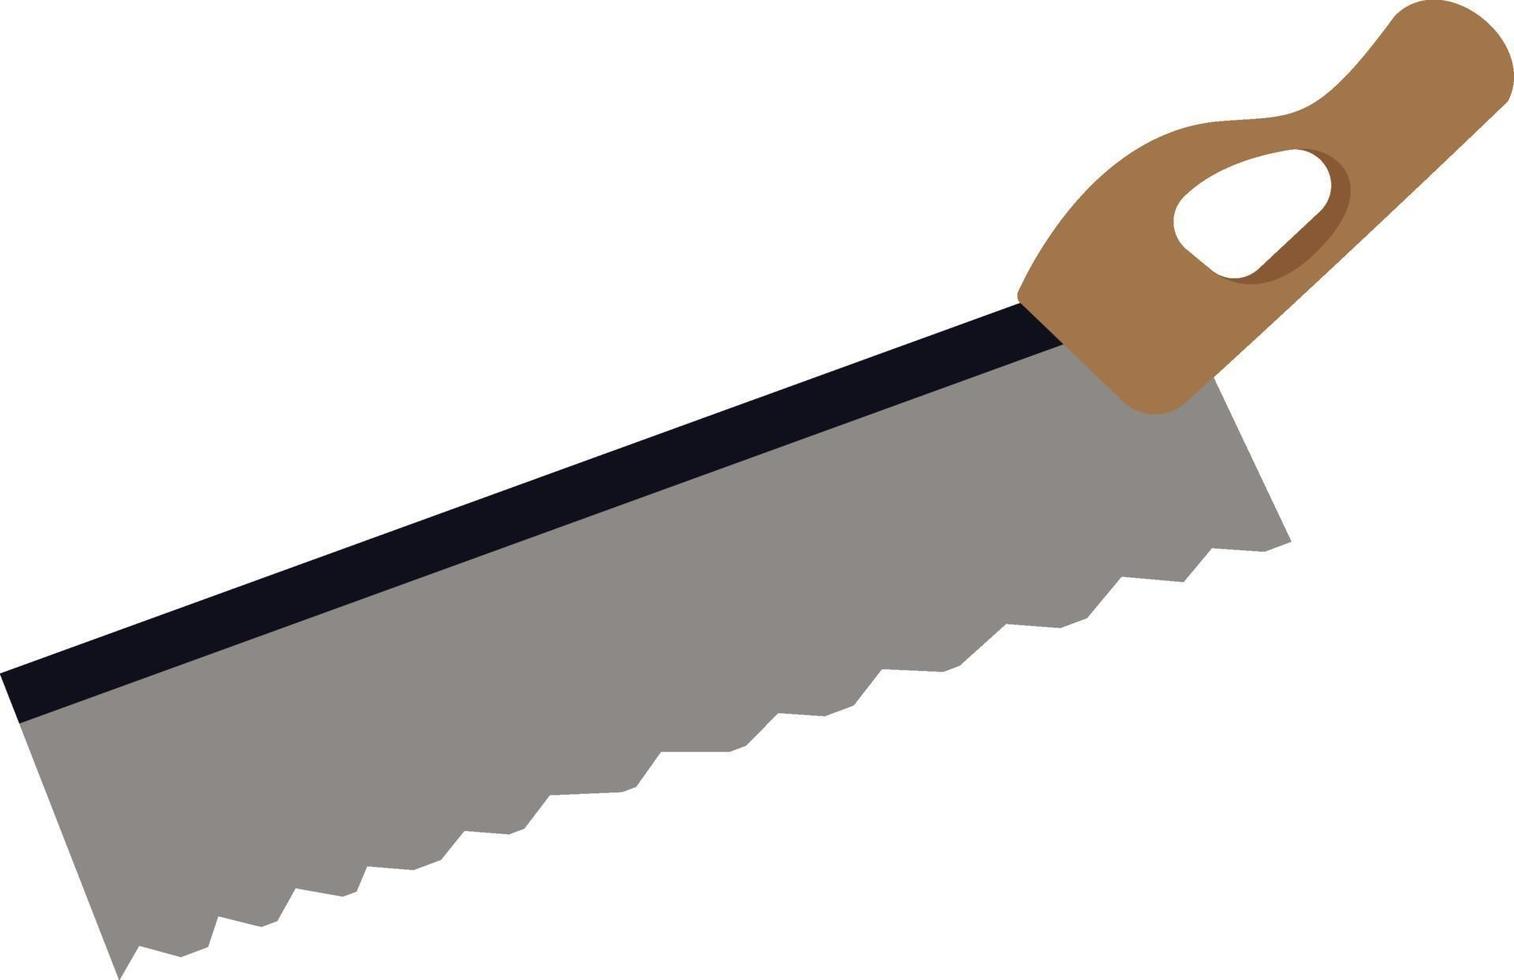 Hand saw, illustration, vector on white background